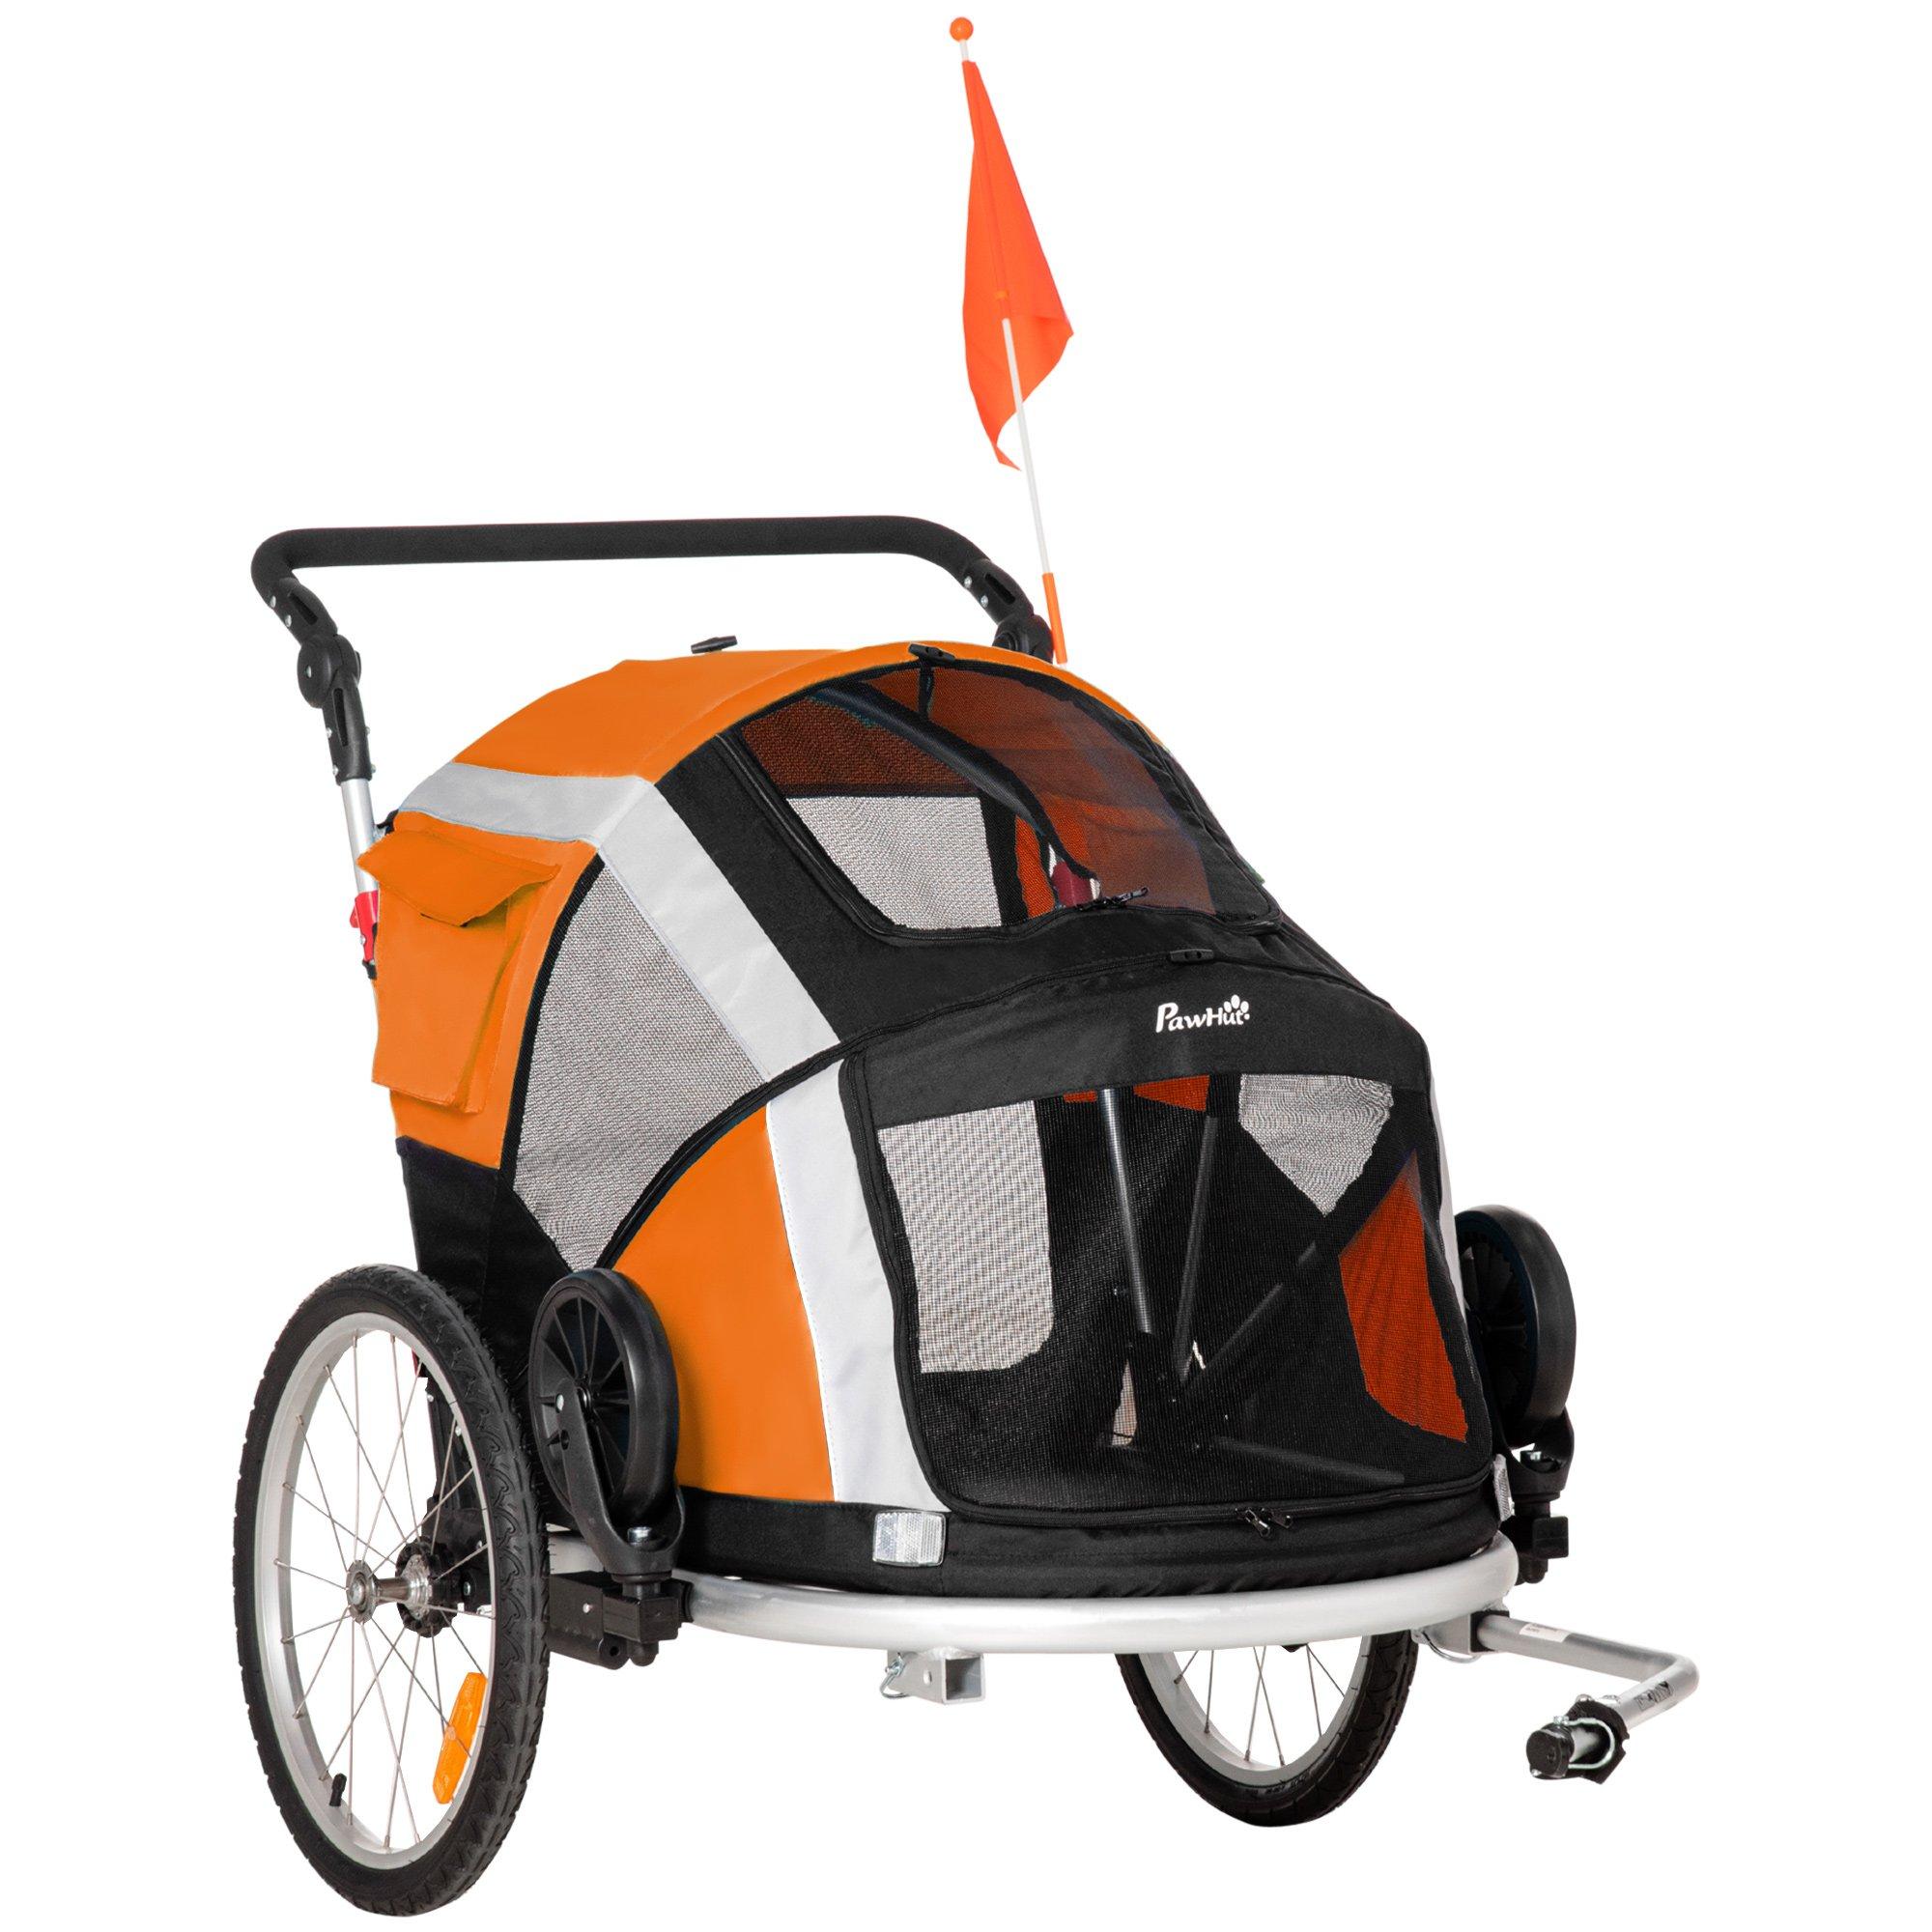 Dog Bike Trailer 2-in-1 Pet Stroller for Large Dogs Cart Foldable Bicycle Carrier Aluminium Frame wi